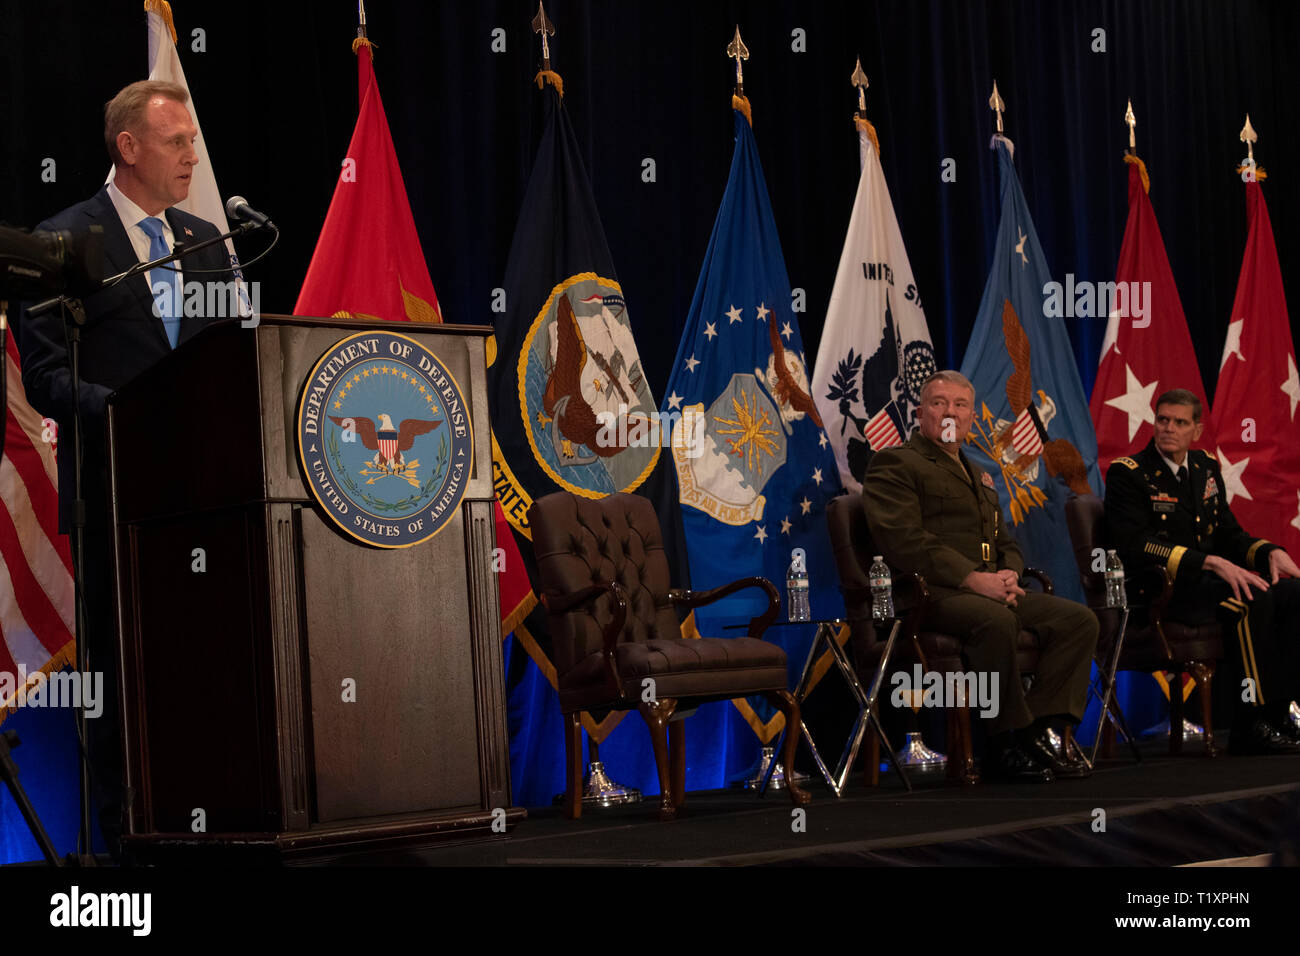 U.S. Acting Secretary of Defense Patrick M. Shanahan speaks at the U.S. Central Command change of command, Tampa, Florida, March 28, 2019. Seated are (center) the incoming commander of U.S. Central Command, U.S. Marine Corps Gen. Kenneth F. McKenzie Jr., and the outgoing Centcom commander, U.S. Army Gen. Joseph L. Votel. (DoD photo by Lisa Ferdinando) Stock Photo